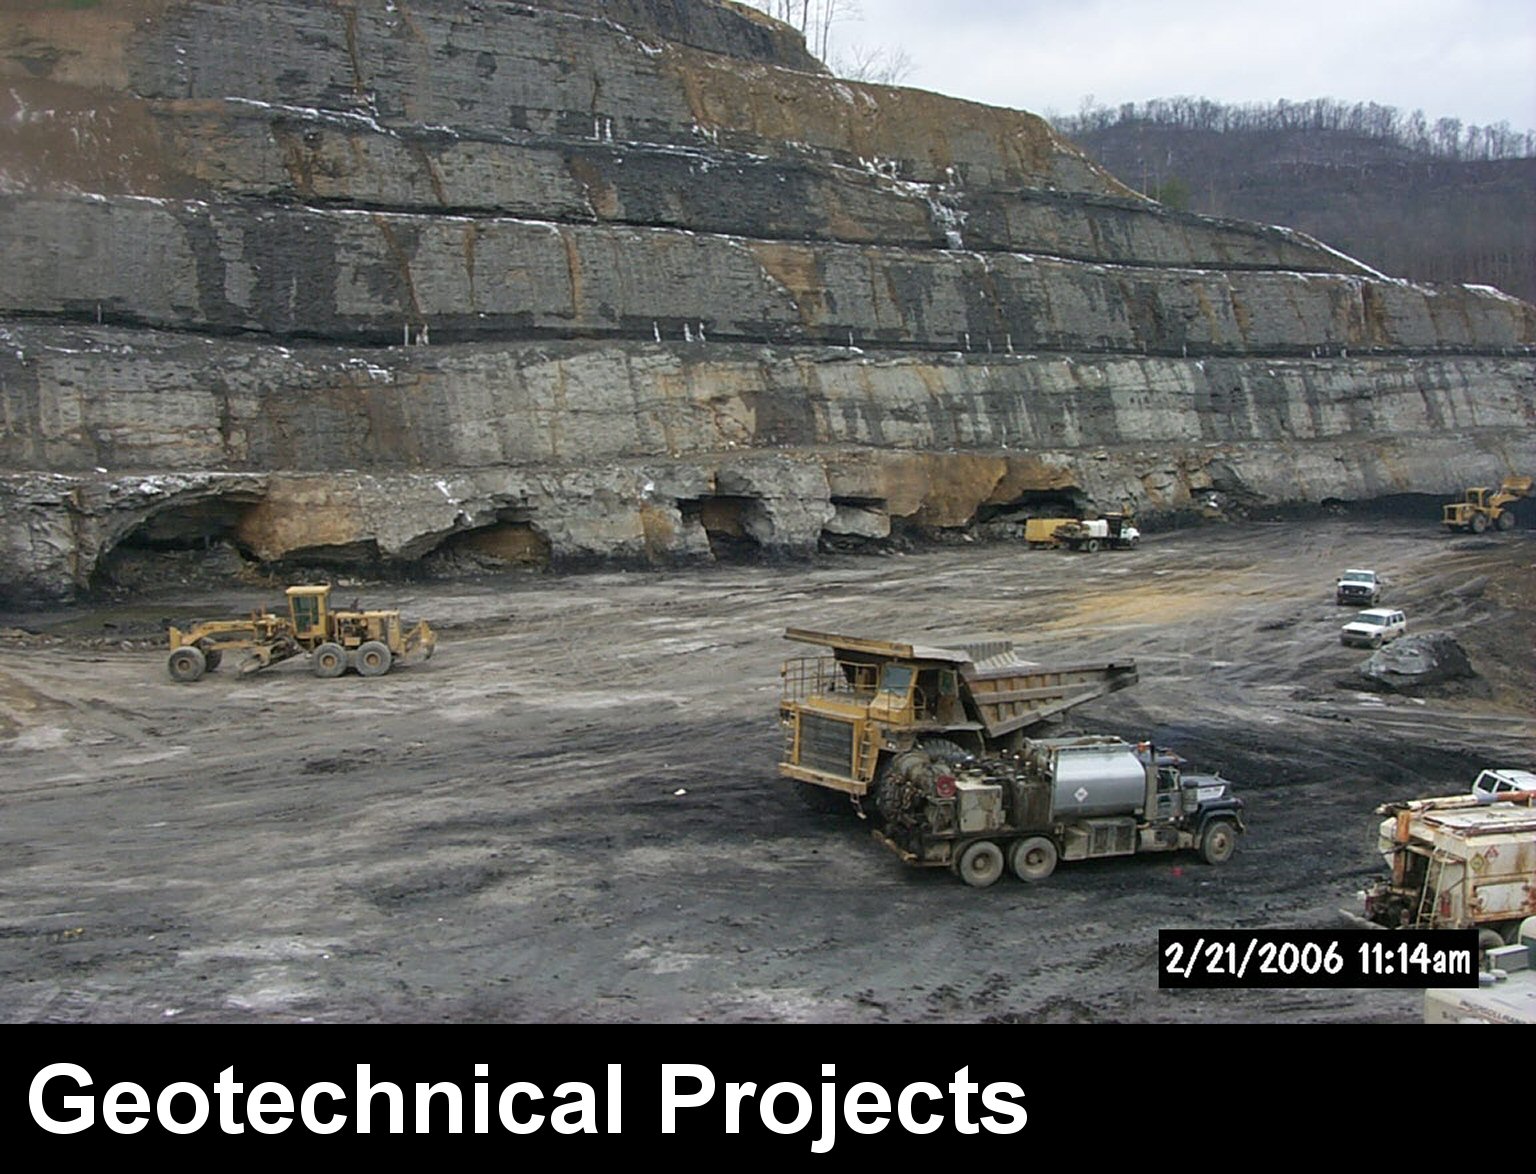 Link to the Geotechnical Projects page